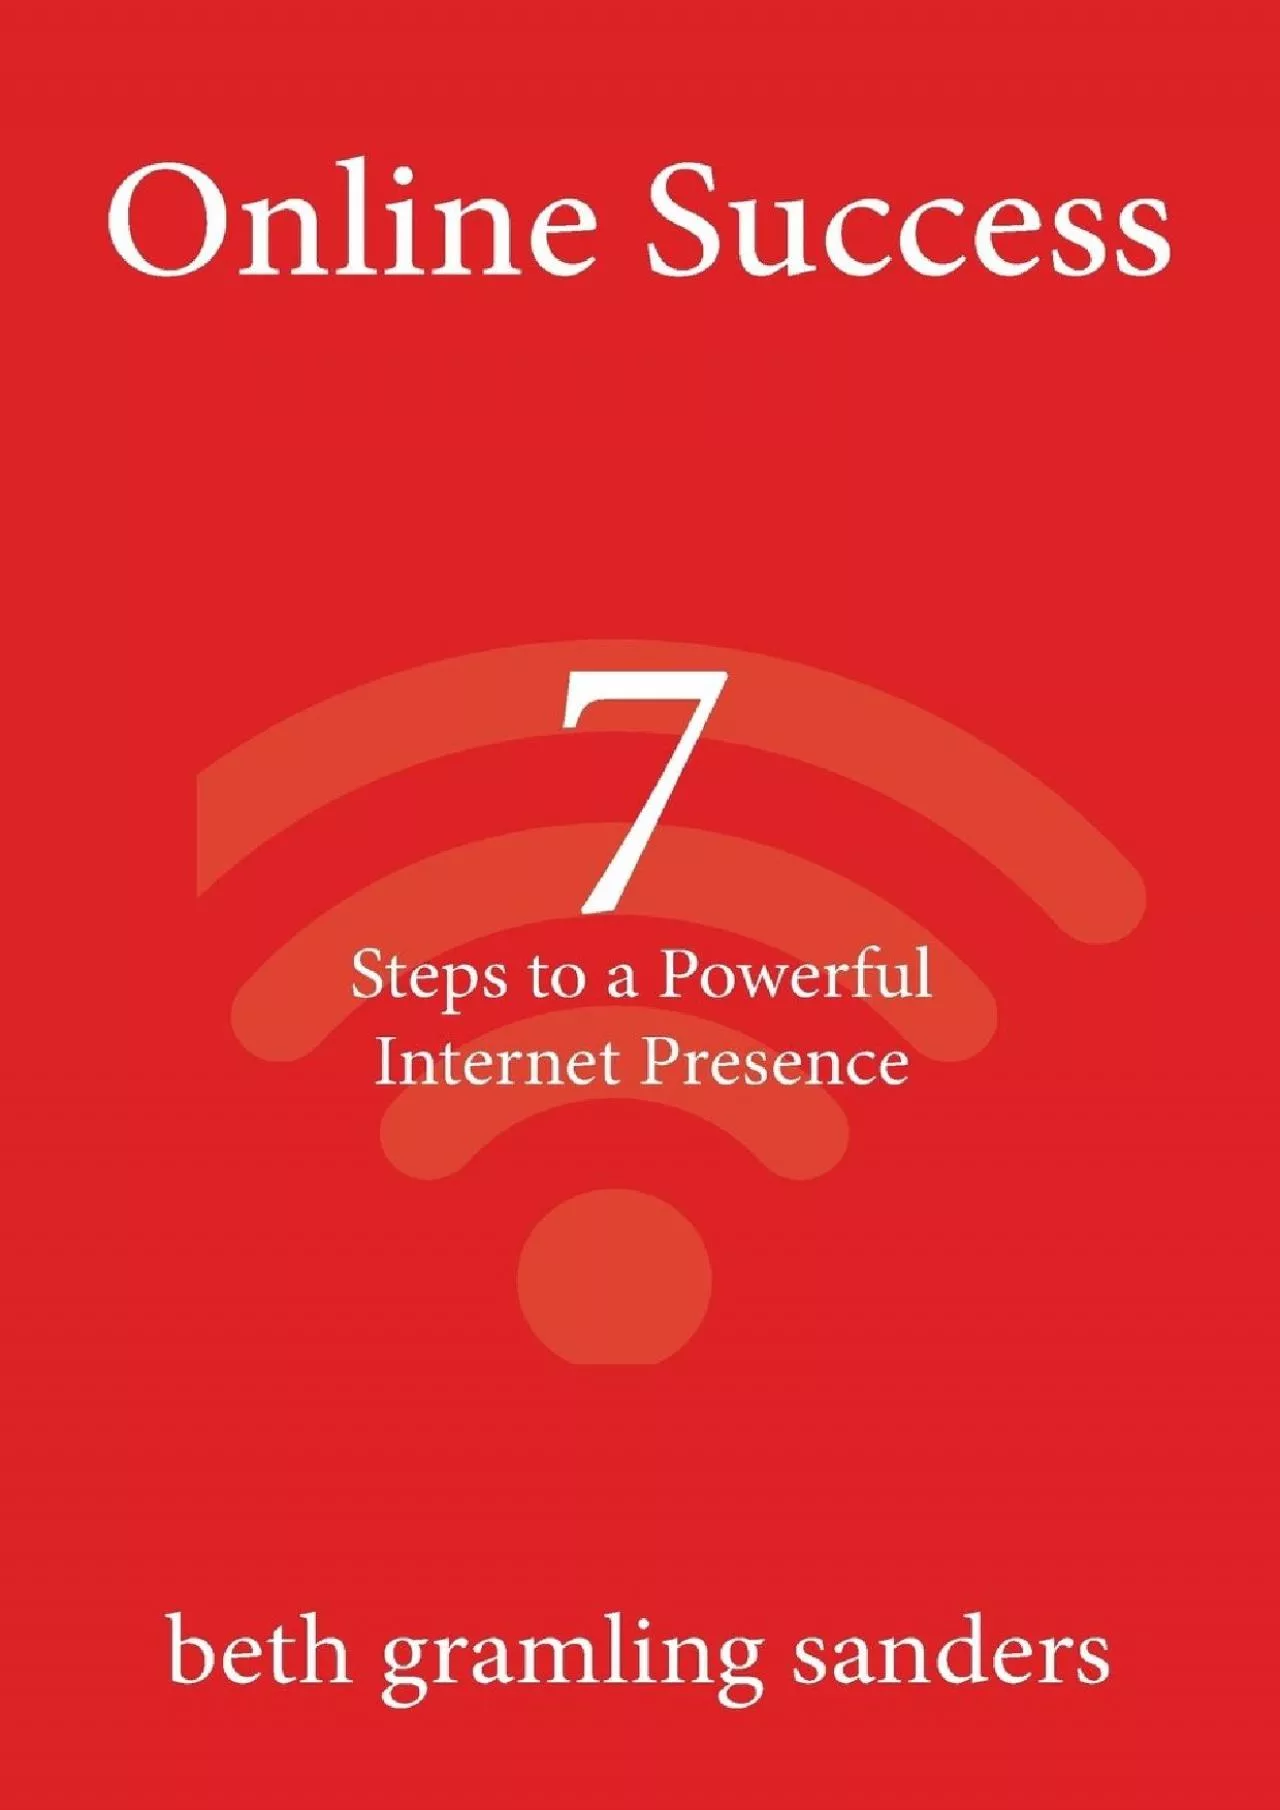 Online Success: 7 Steps to a Powerful Internet Presence: What small organizations, entrepreneurs,